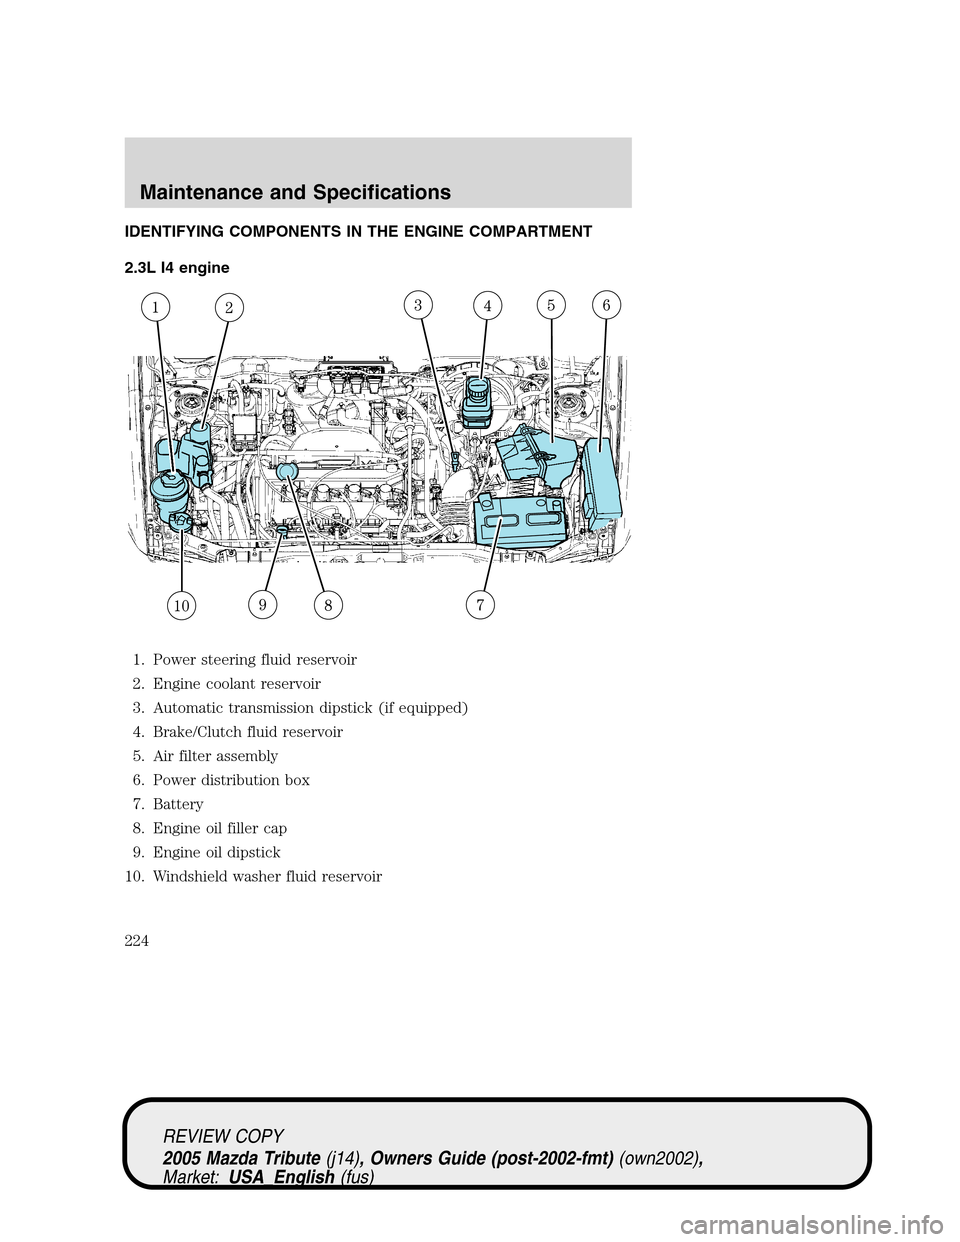 MAZDA MODEL TRIBUTE 2005  Owners Manual (in English) IDENTIFYING COMPONENTS IN THE ENGINE COMPARTMENT
2.3L I4 engine
1. Power steering fluid reservoir
2. Engine coolant reservoir
3. Automatic transmission dipstick (if equipped)
4. Brake/Clutch fluid res